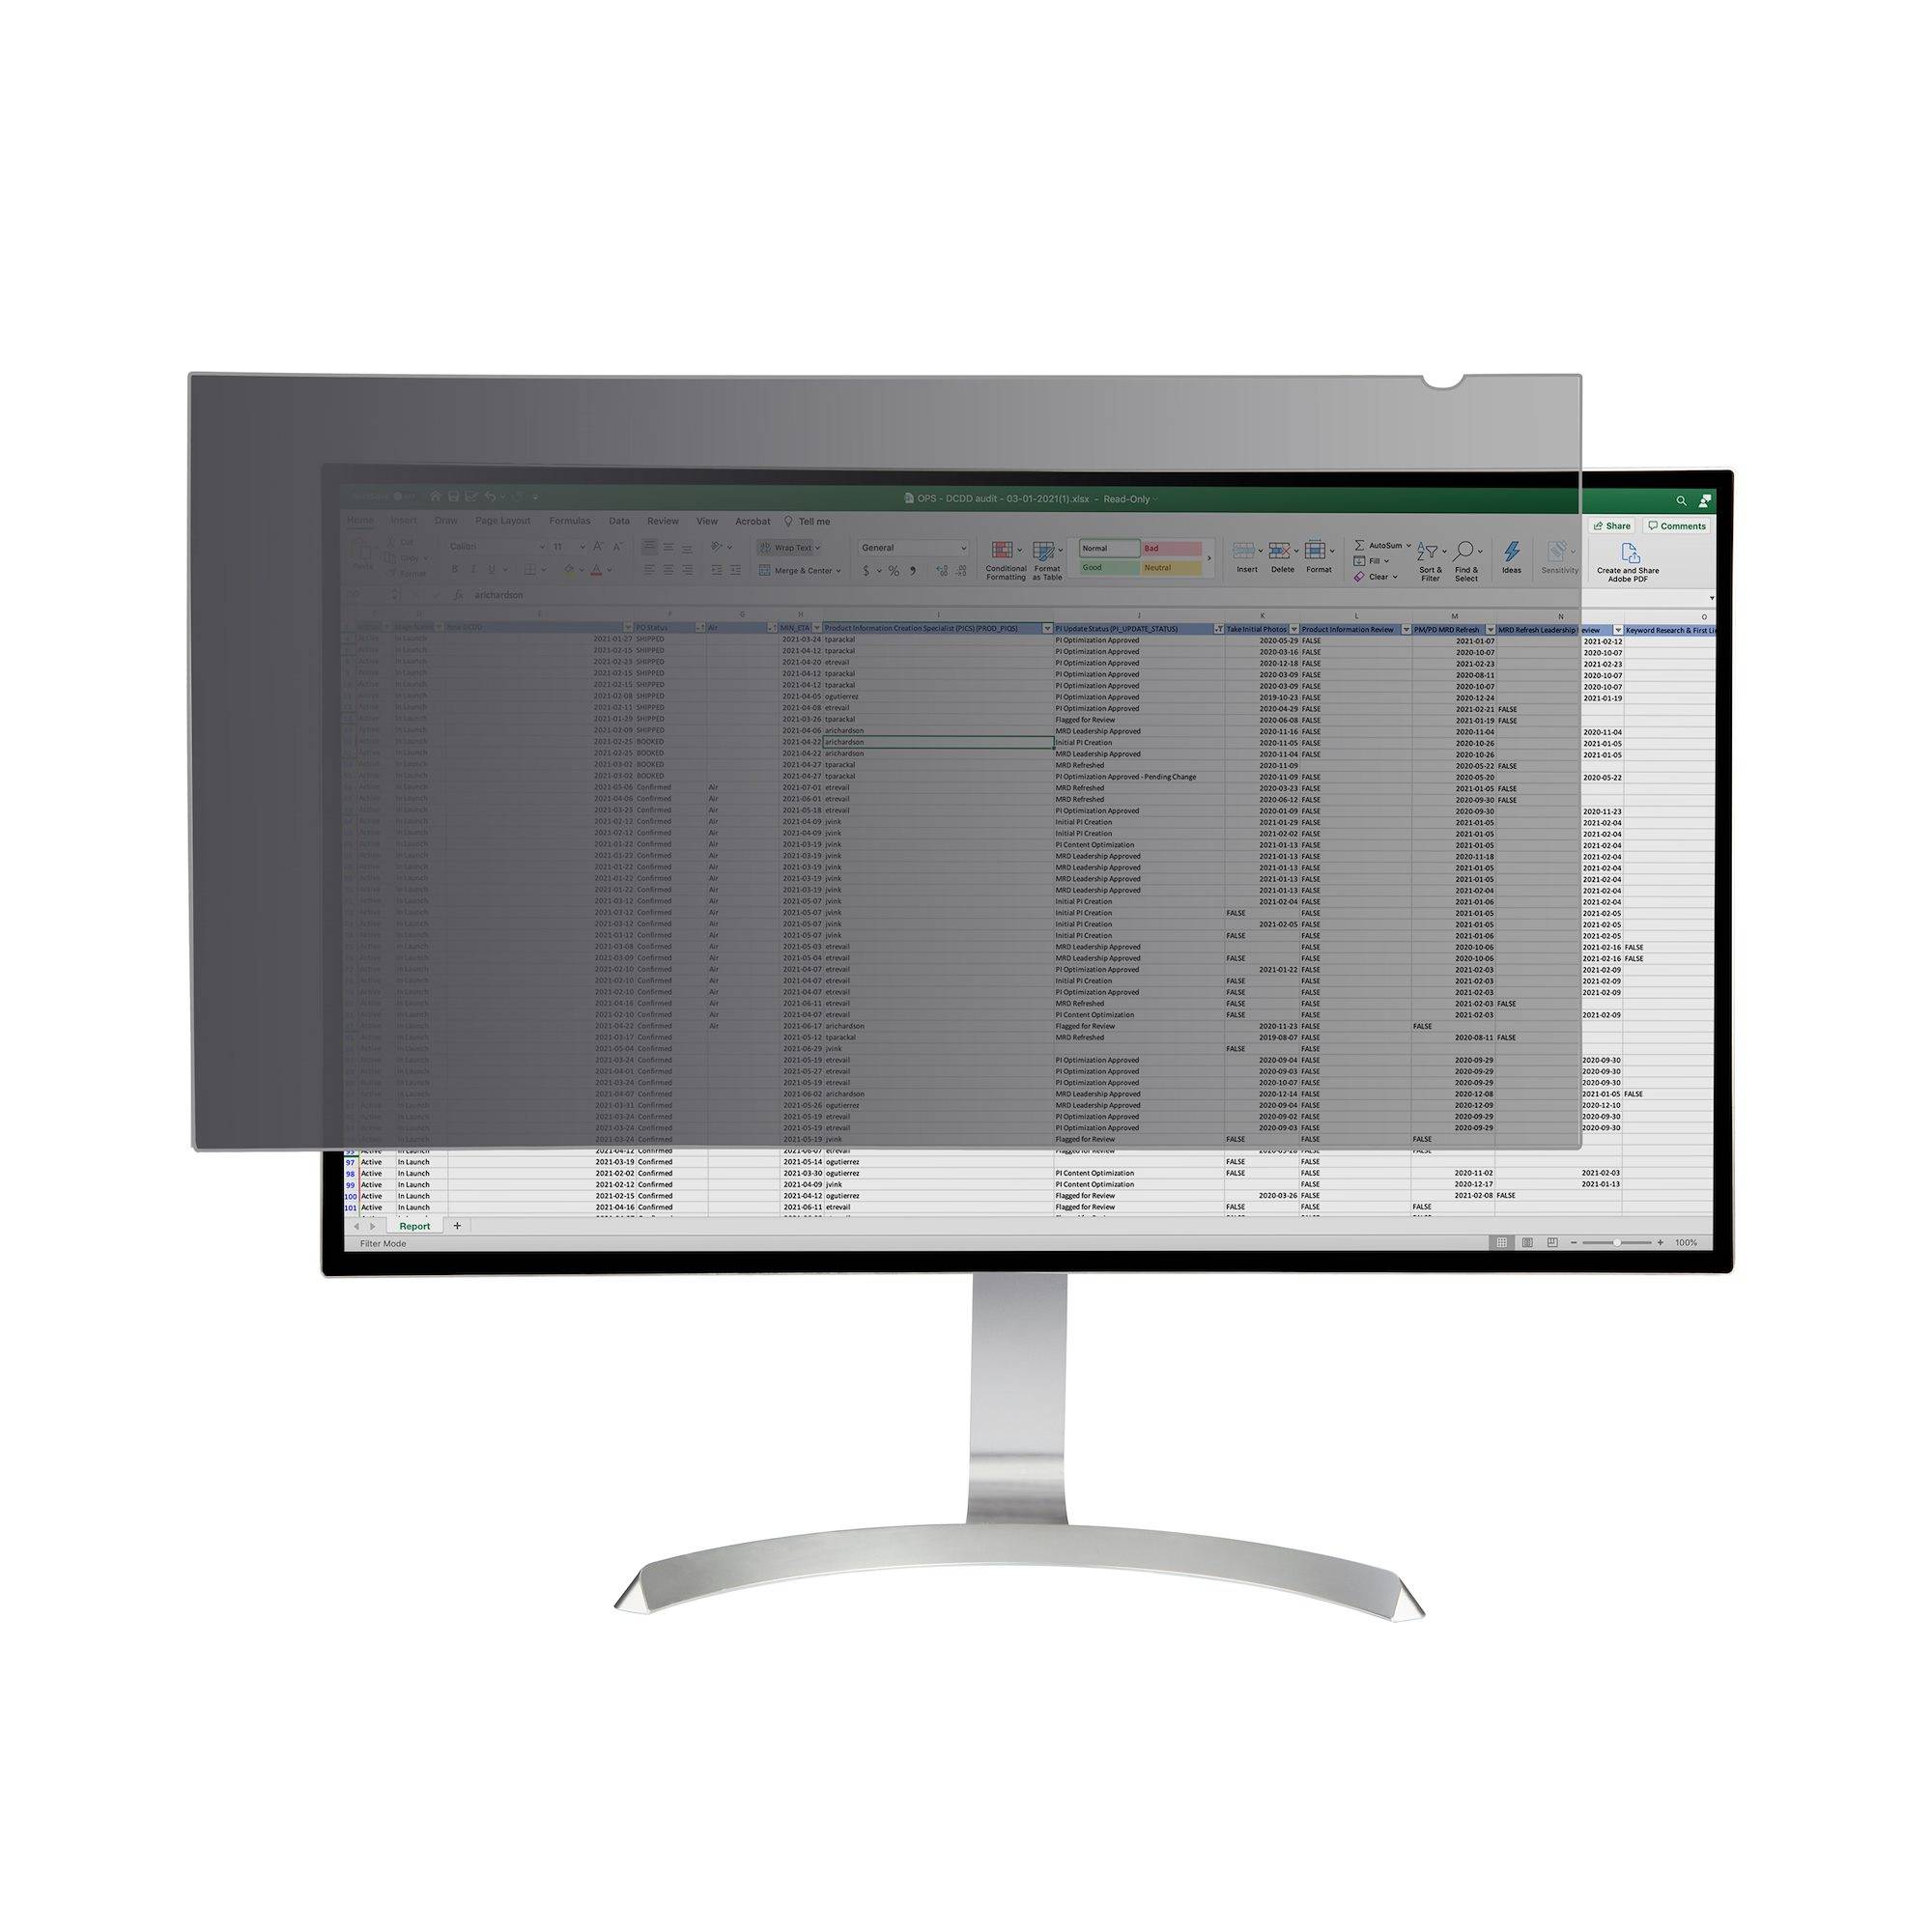 Rca Informatique - Image du produit : 32IN. MONITOR PRIVACY SCREEN - UNIVERSAL - MATTE OR GLOSSY